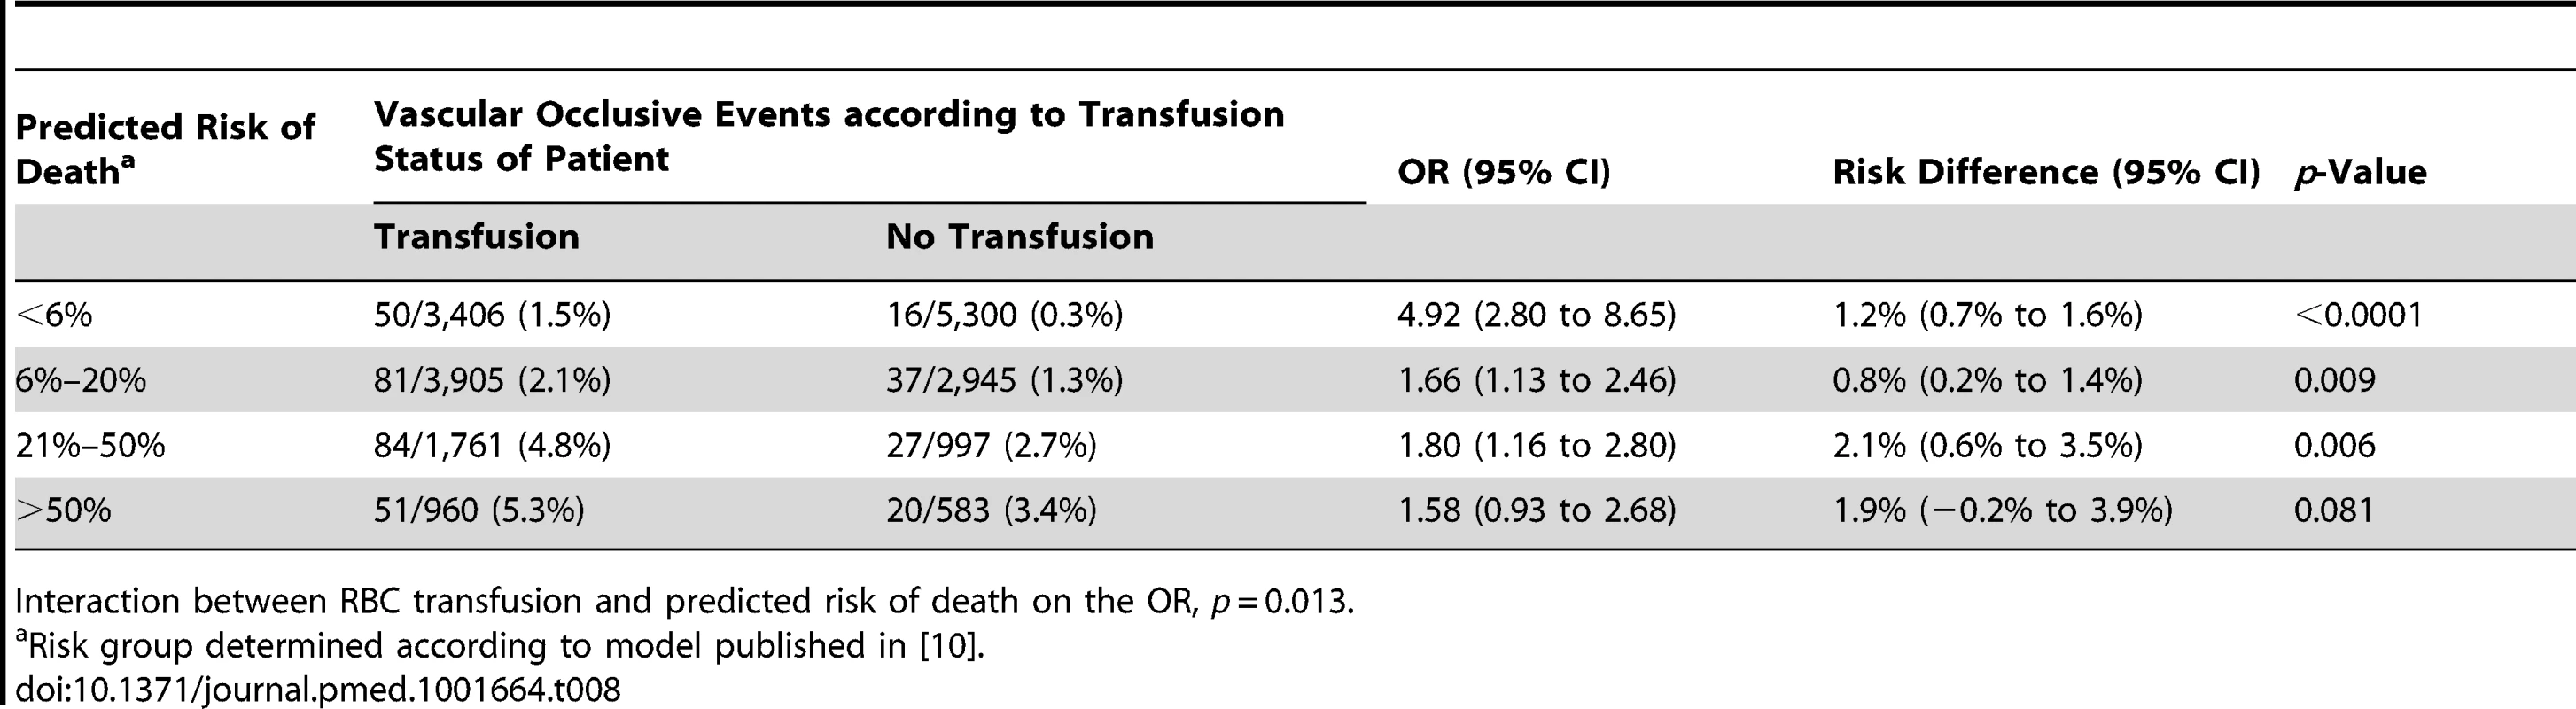 Vascular occlusive events (fatal and non-fatal) by category of predicted risk of death and red blood cell transfusion.